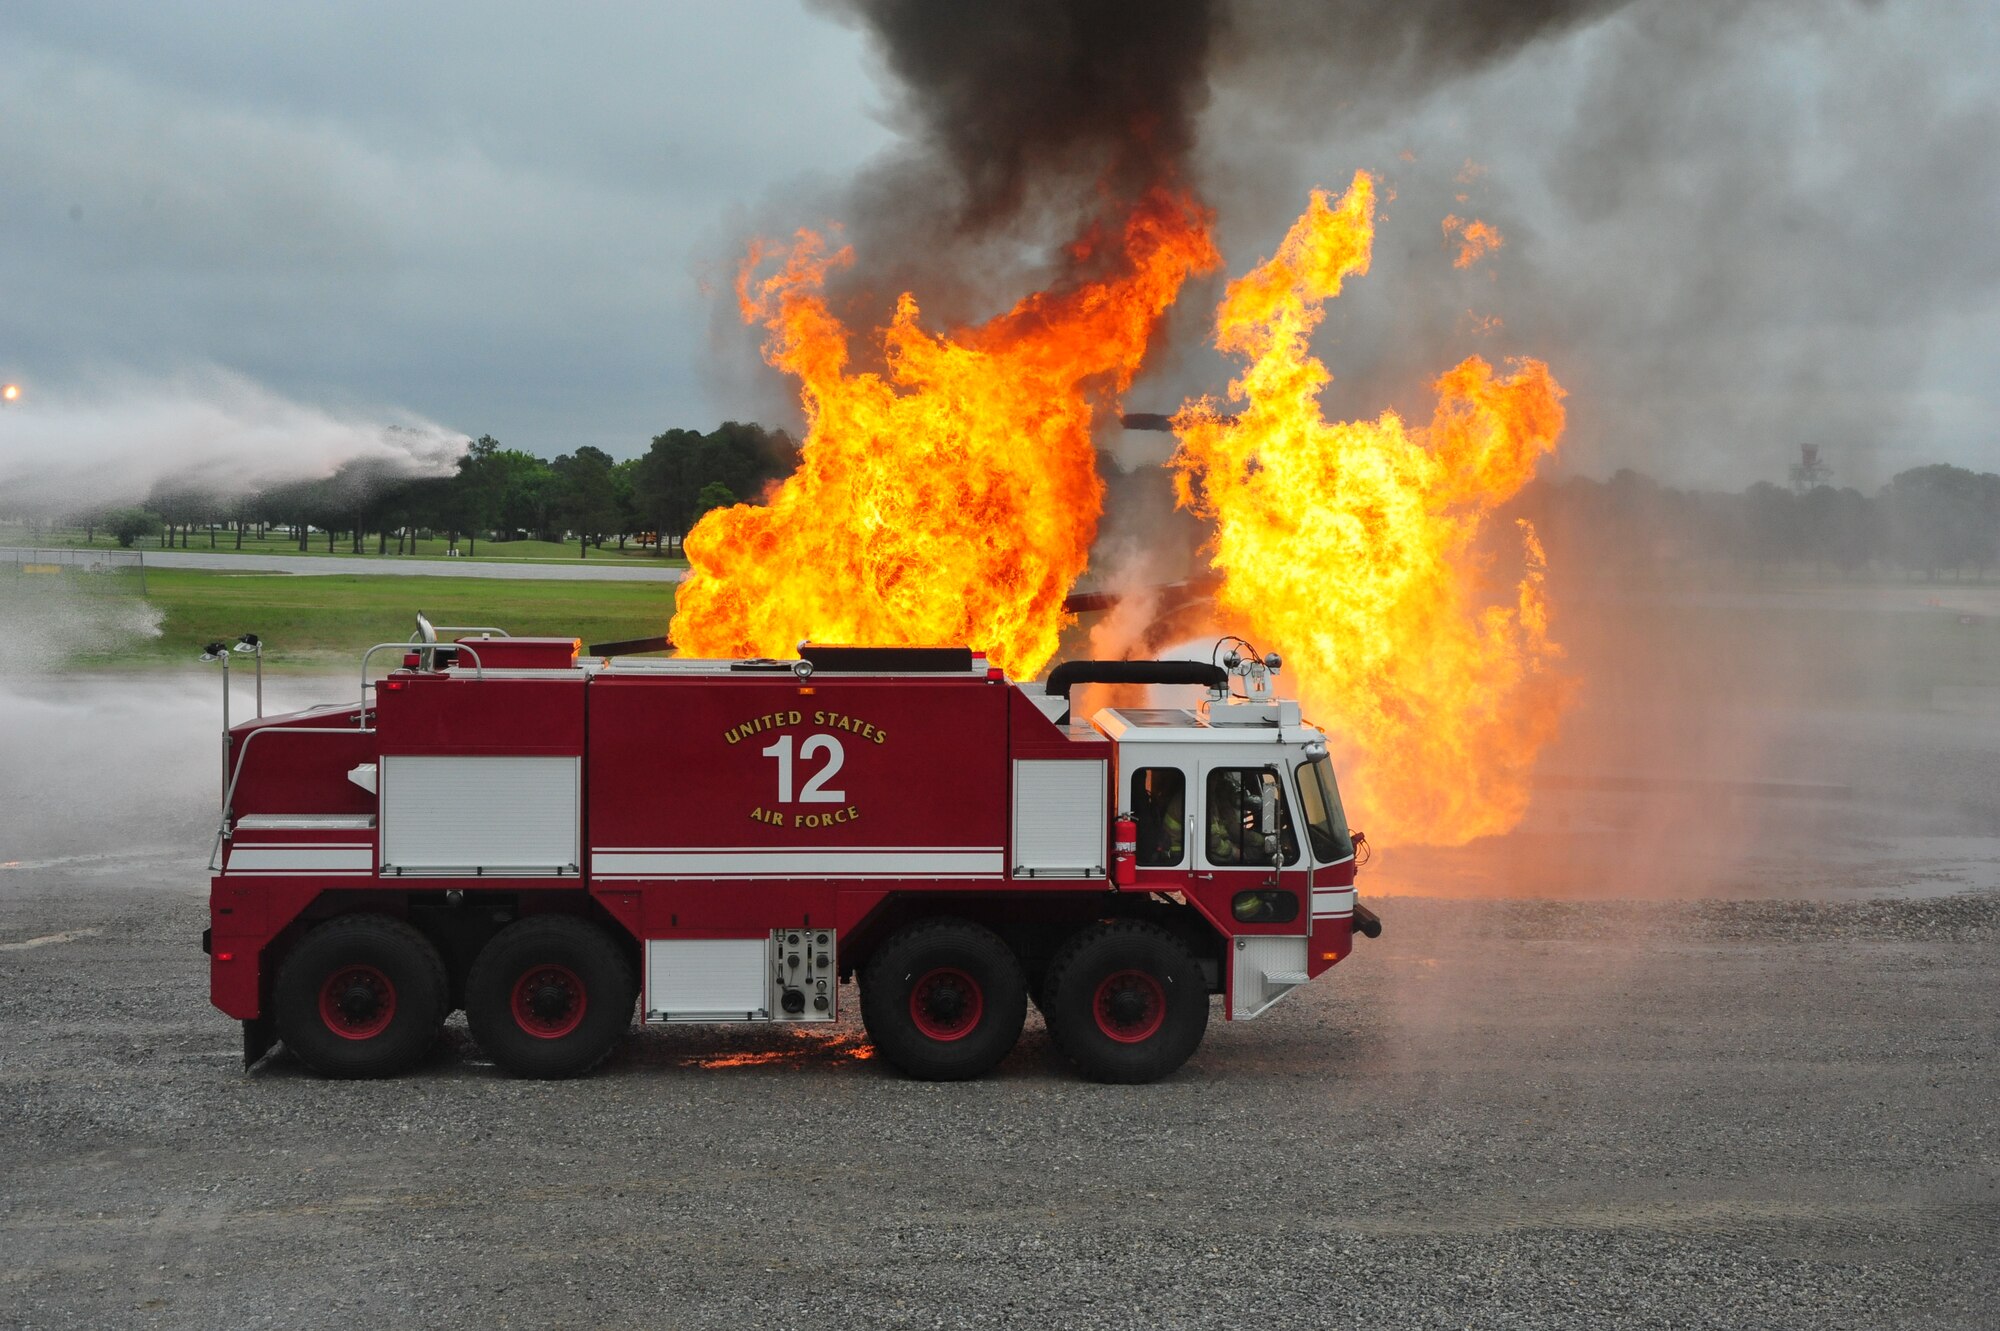 Maxwell Fire Department firefighters spray a simulated burning aircraft during a training scenario on April 19. The fire department trains regularly to increase readiness and stay proficient in their craft. (Air Force photo by Airman 1st Class William Blankenship)